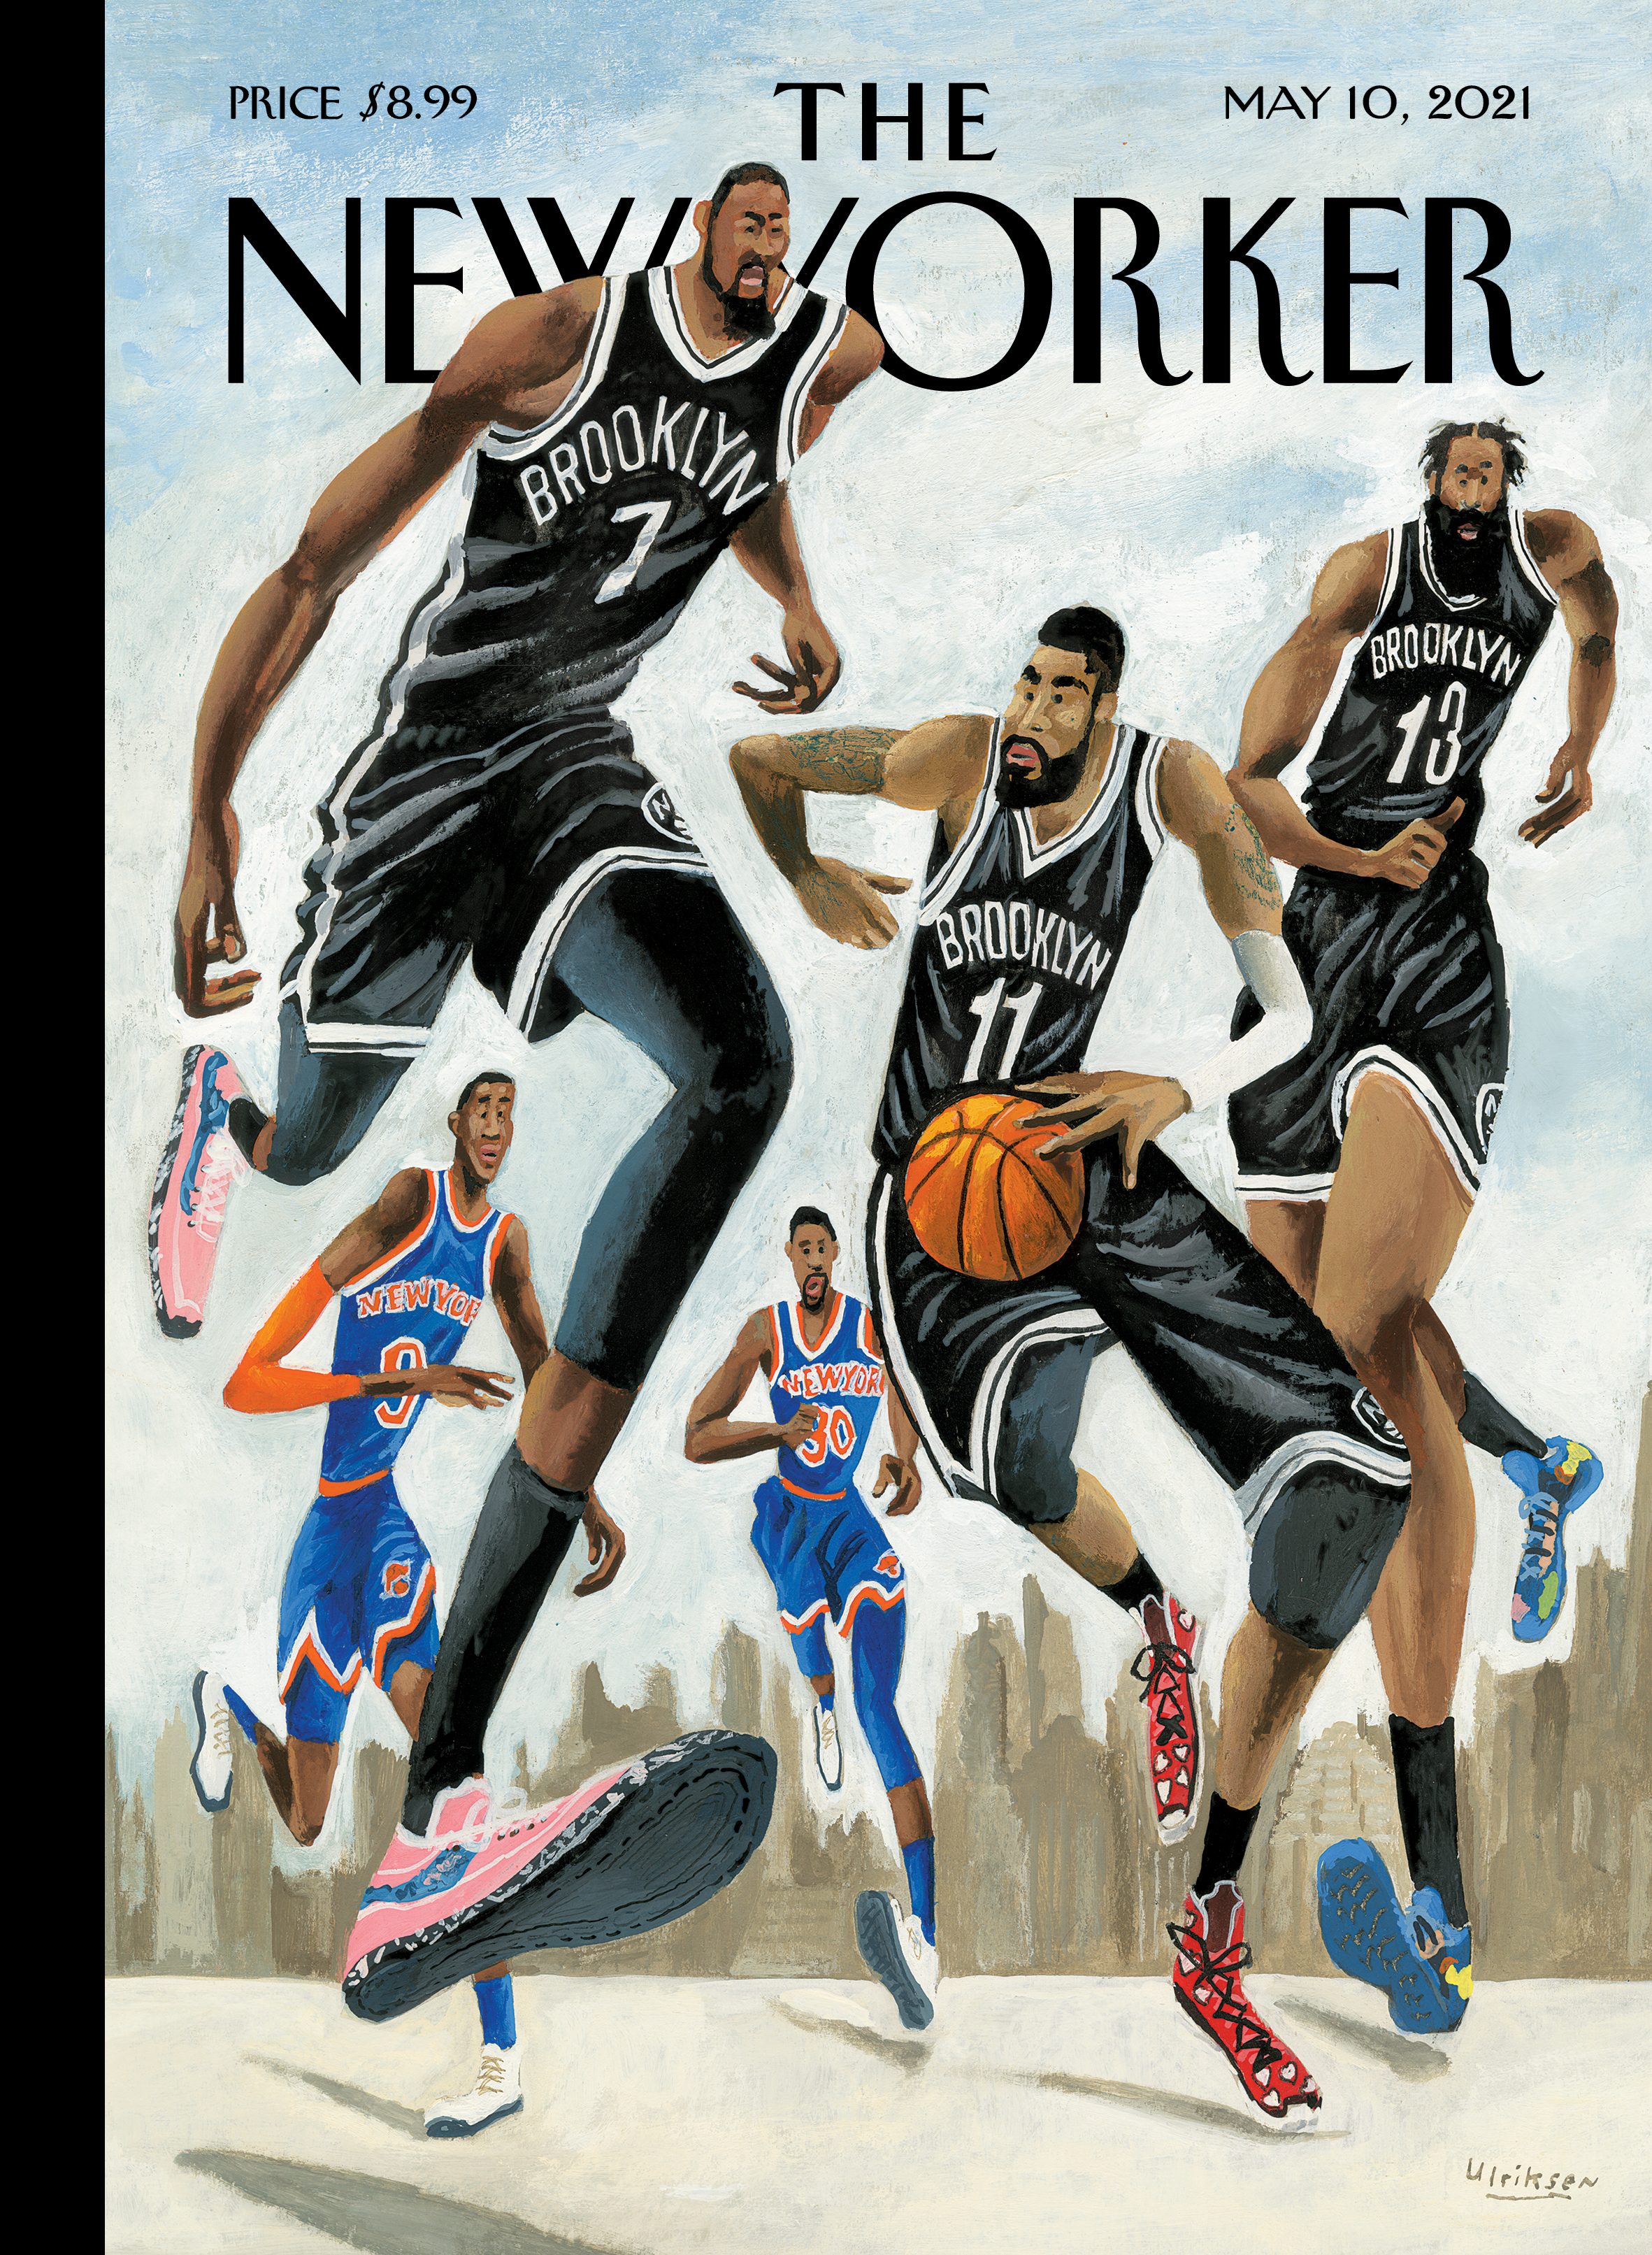 The New Yorker - "Hoop Dreams in New York," May 10, 2021